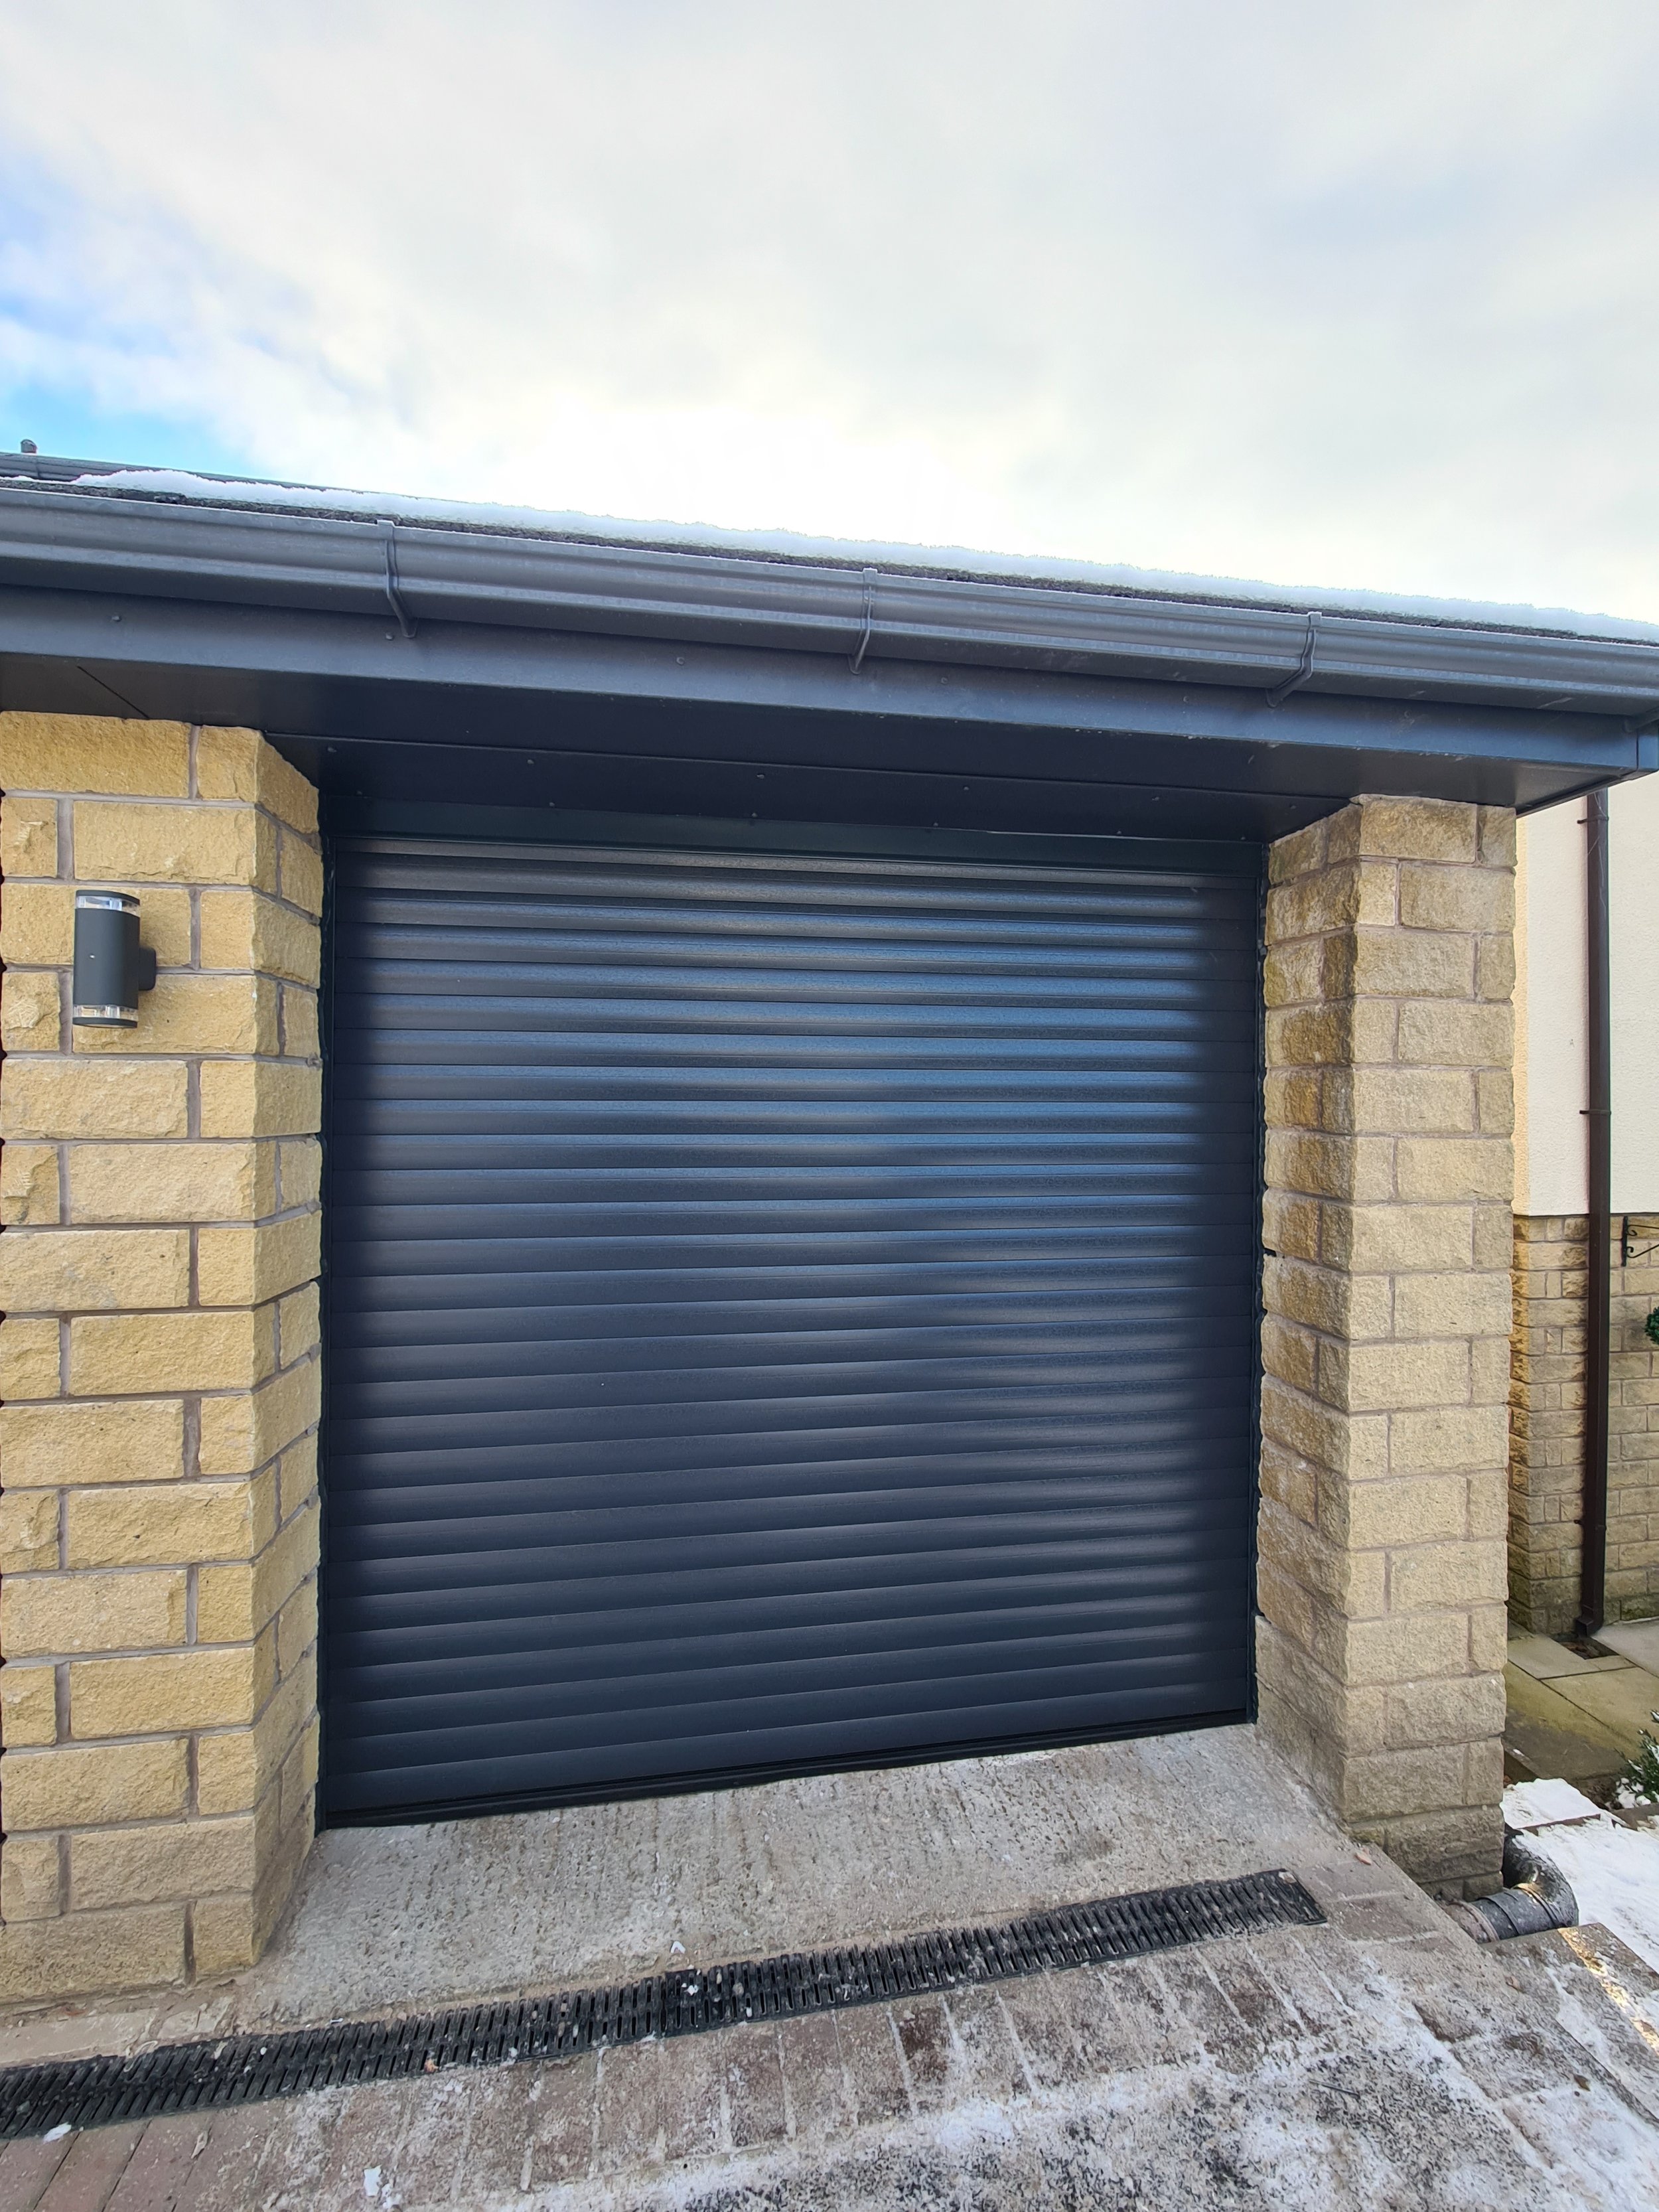 Uk Doors Midlands Classic 77m fully insulated roller garage door in Textured Anthracite grey W/ matching frame